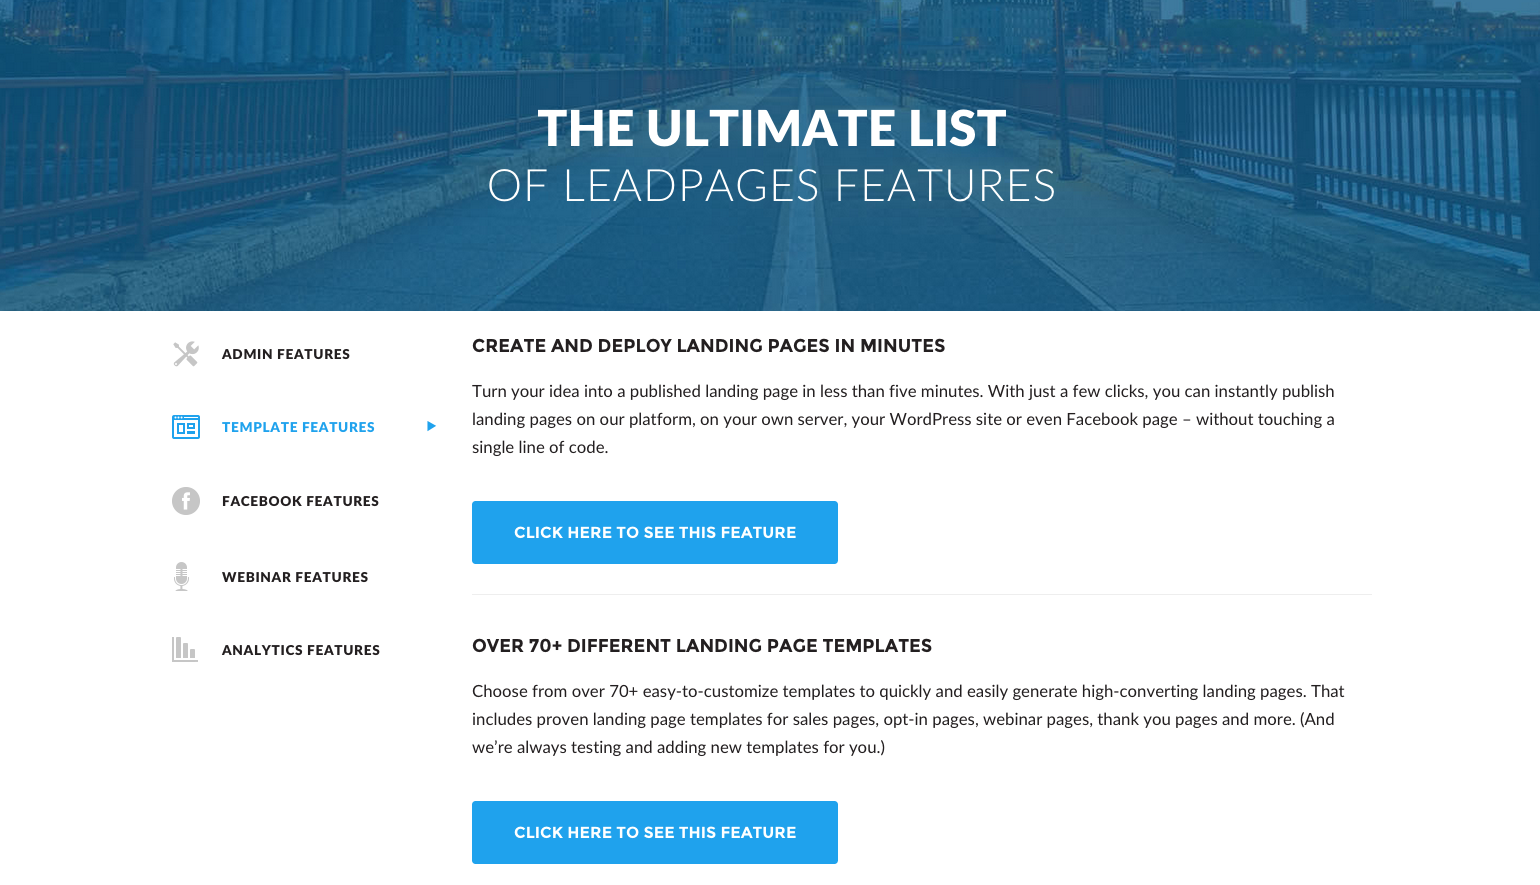 LeadPages features